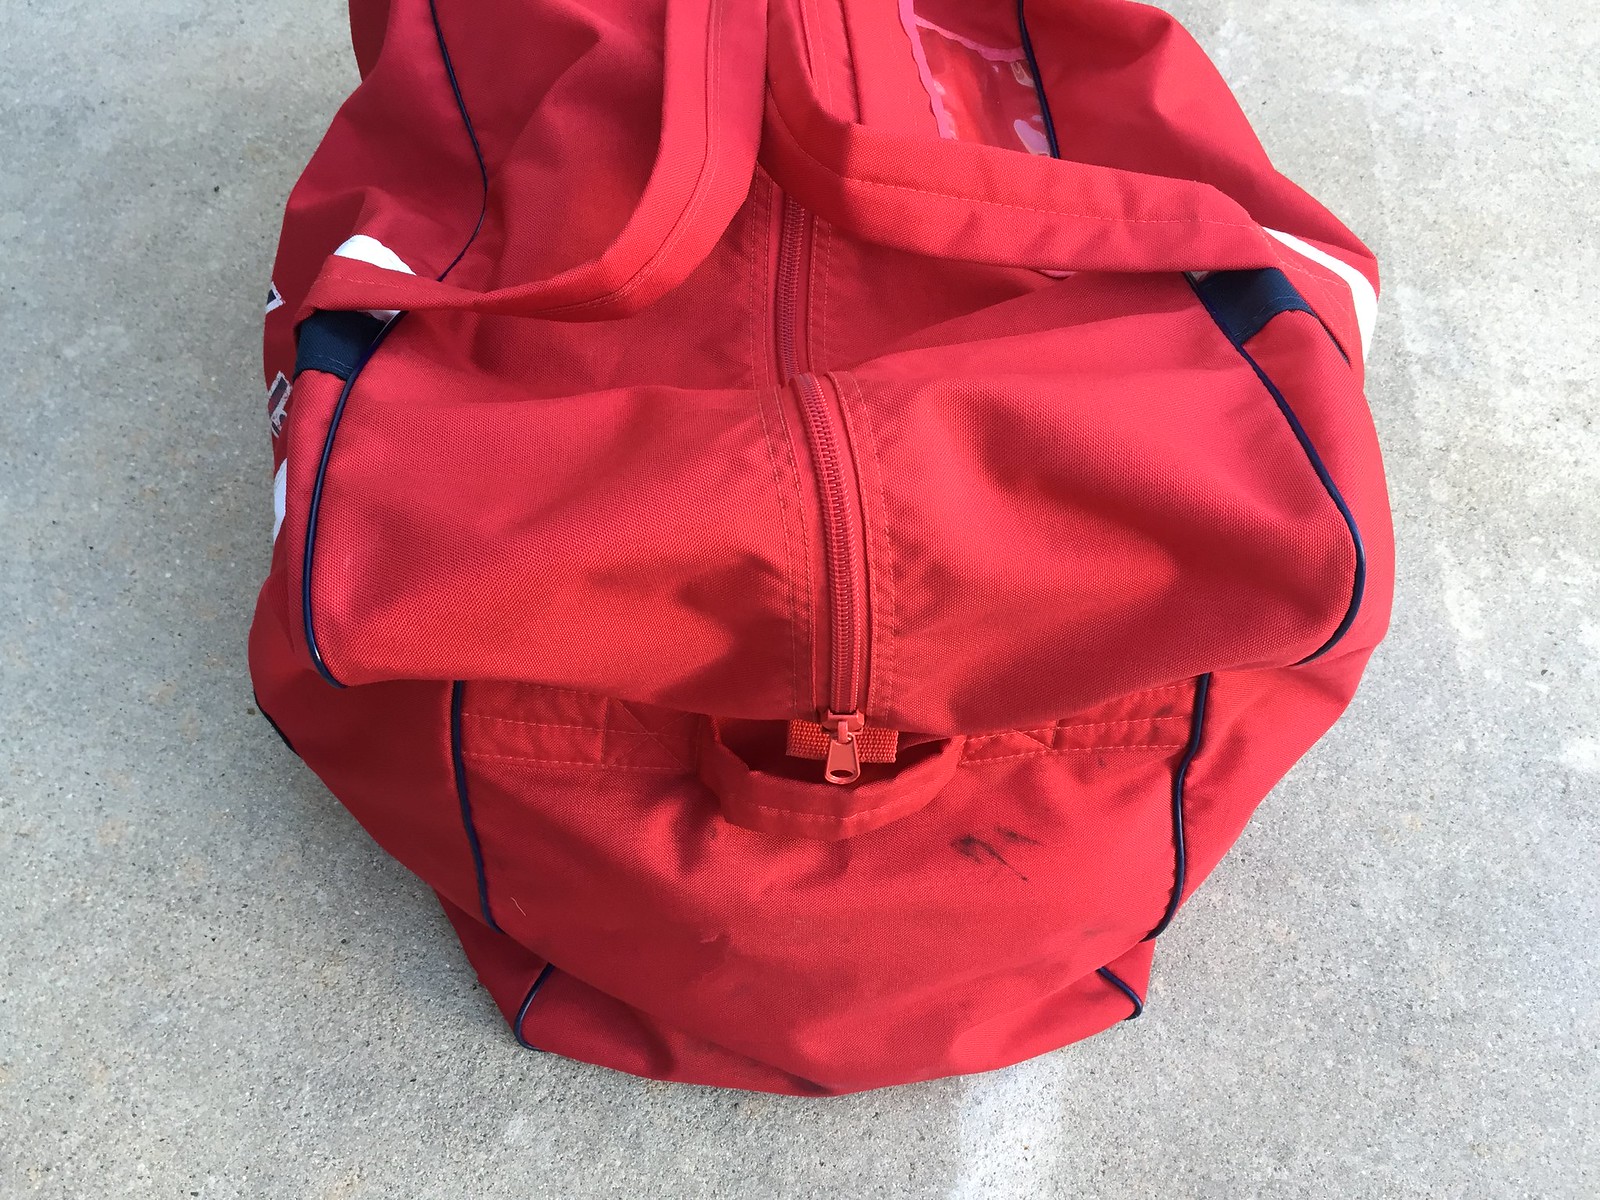 Official Washington Capitals Player Gear Bag - Other Gear - For Sale ...